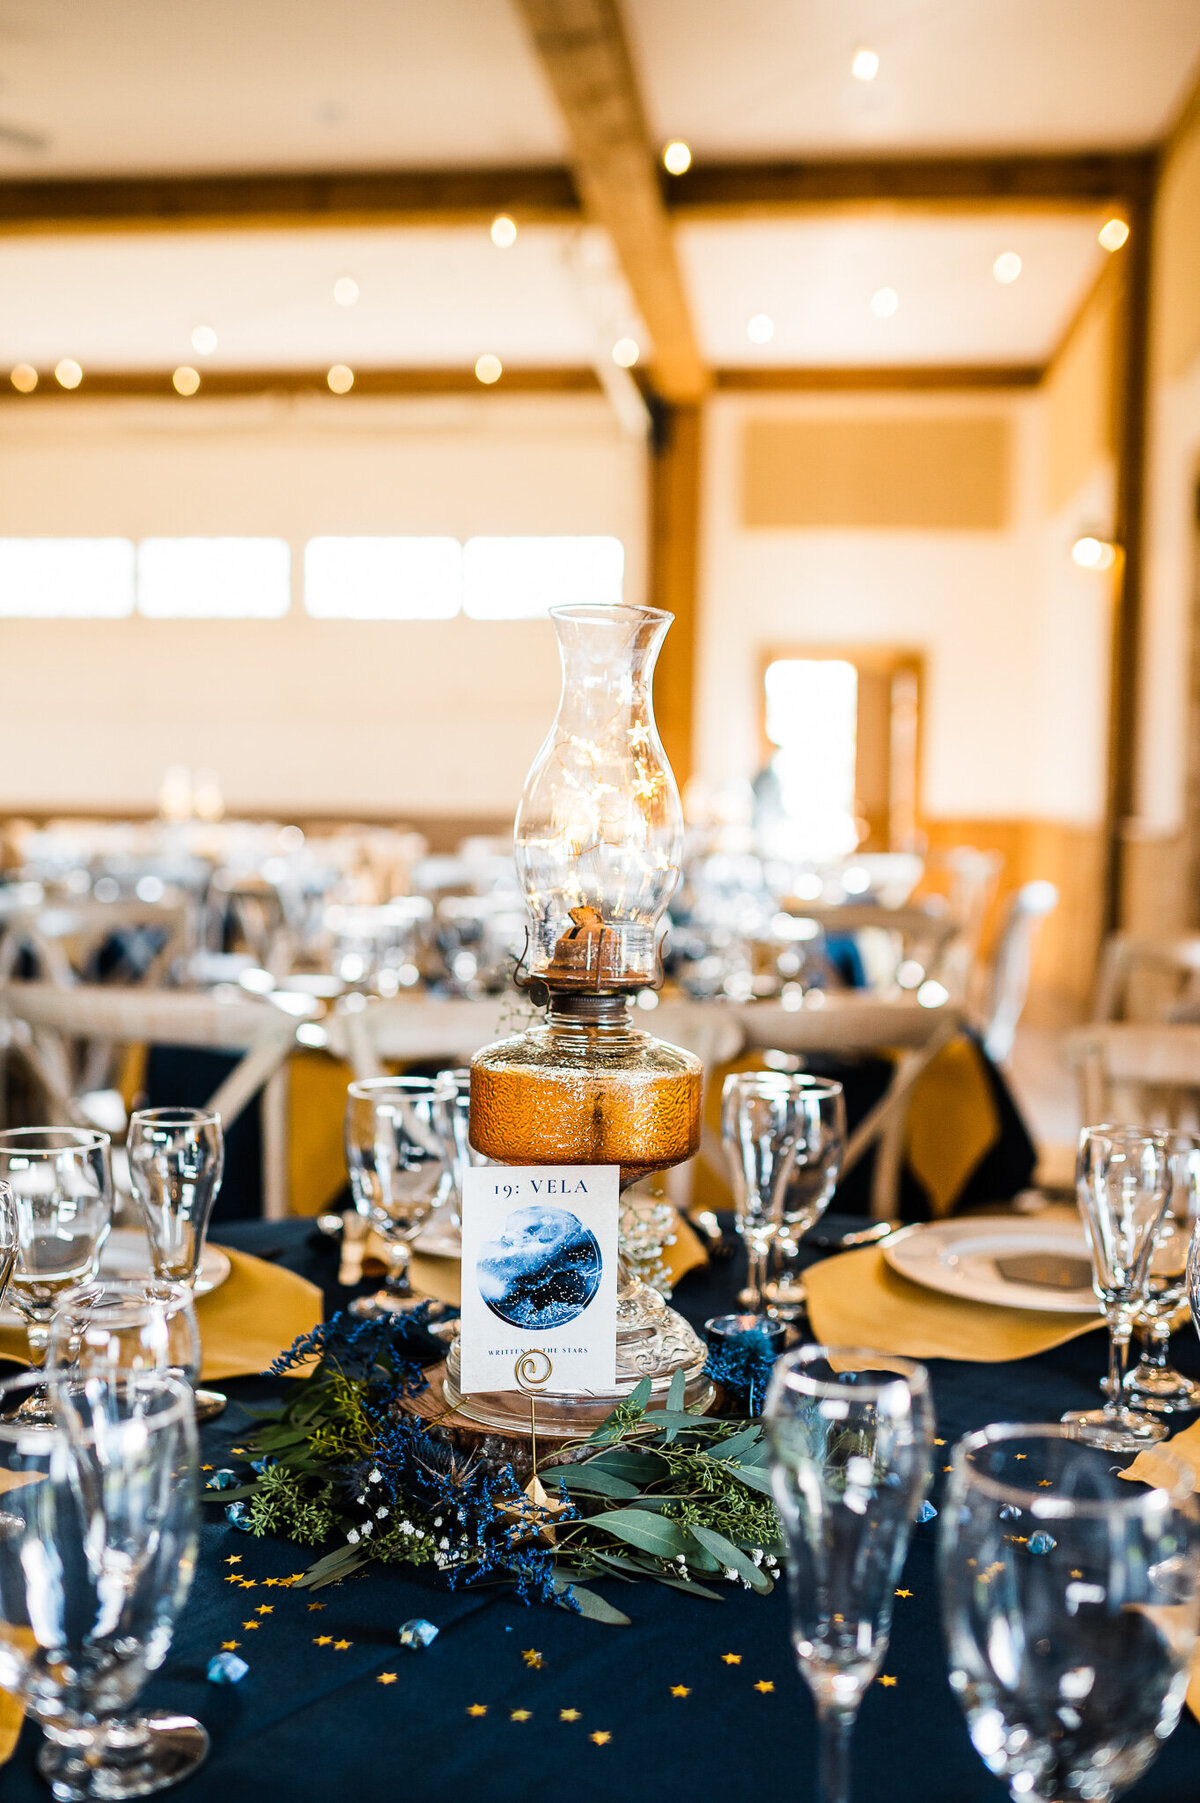 wedding reception table decor with blue and gold accents at Shenandoah wedding venue